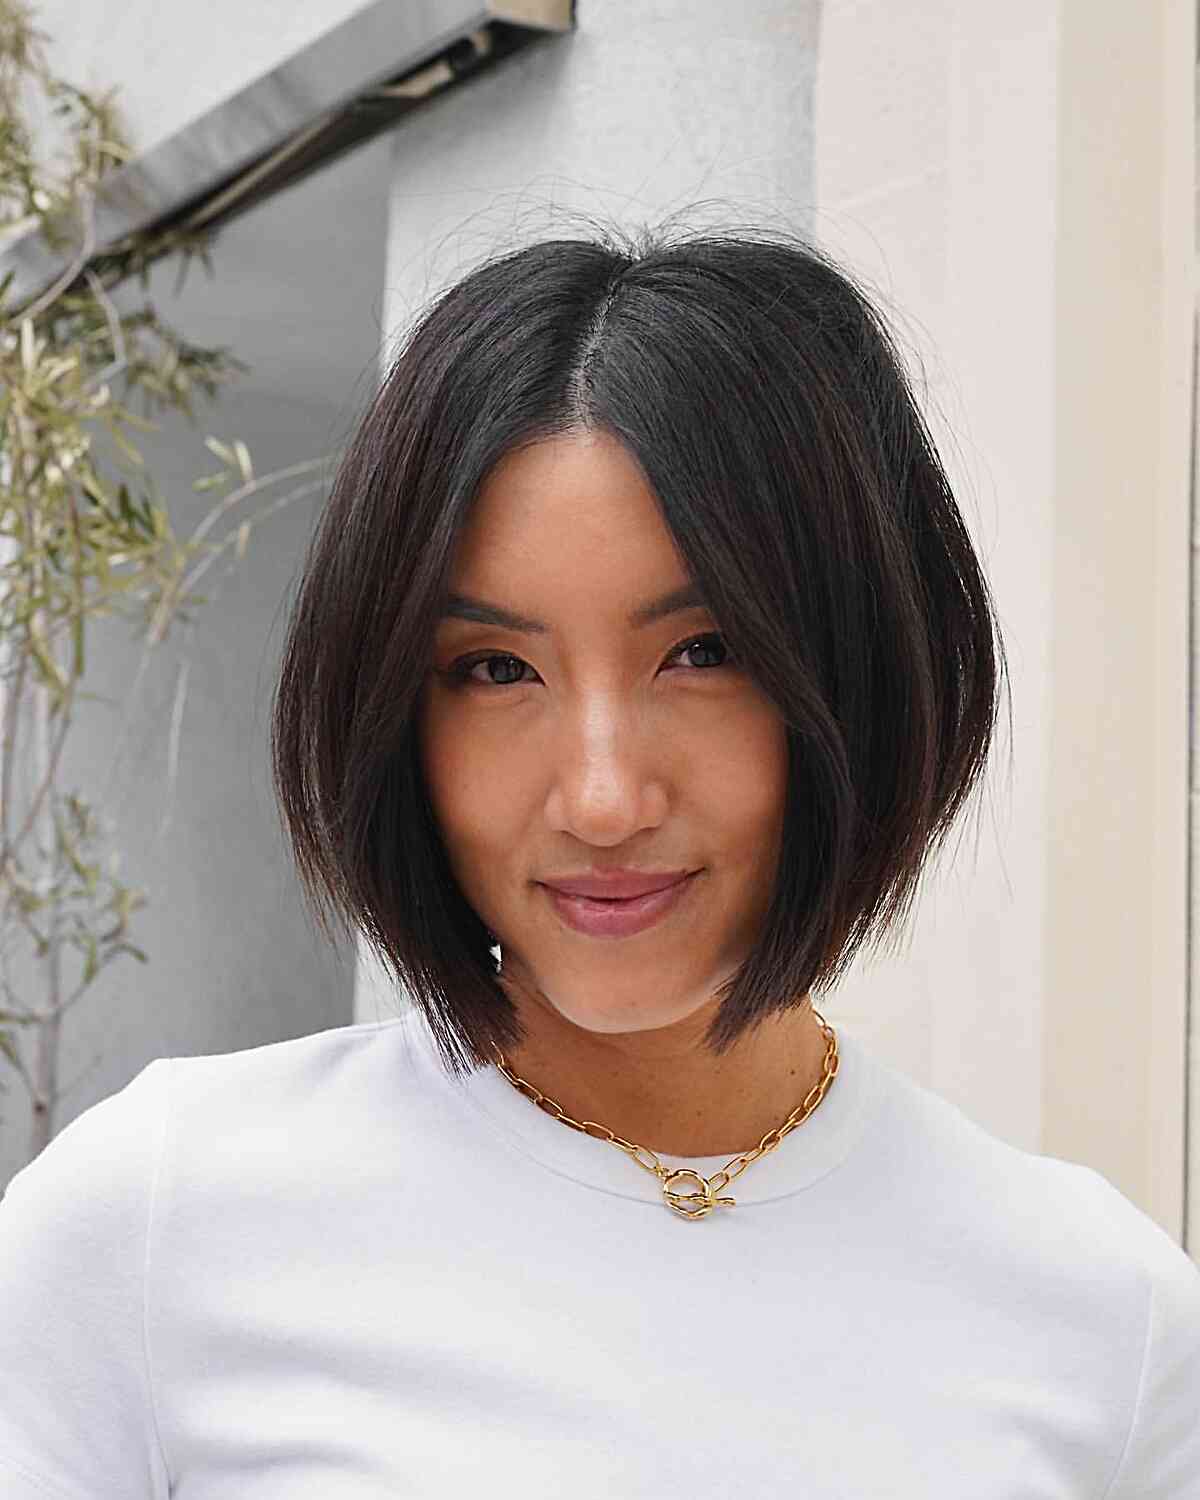 19 Cutest Chin-Length Layered Bobs for a Fresh, Short Look